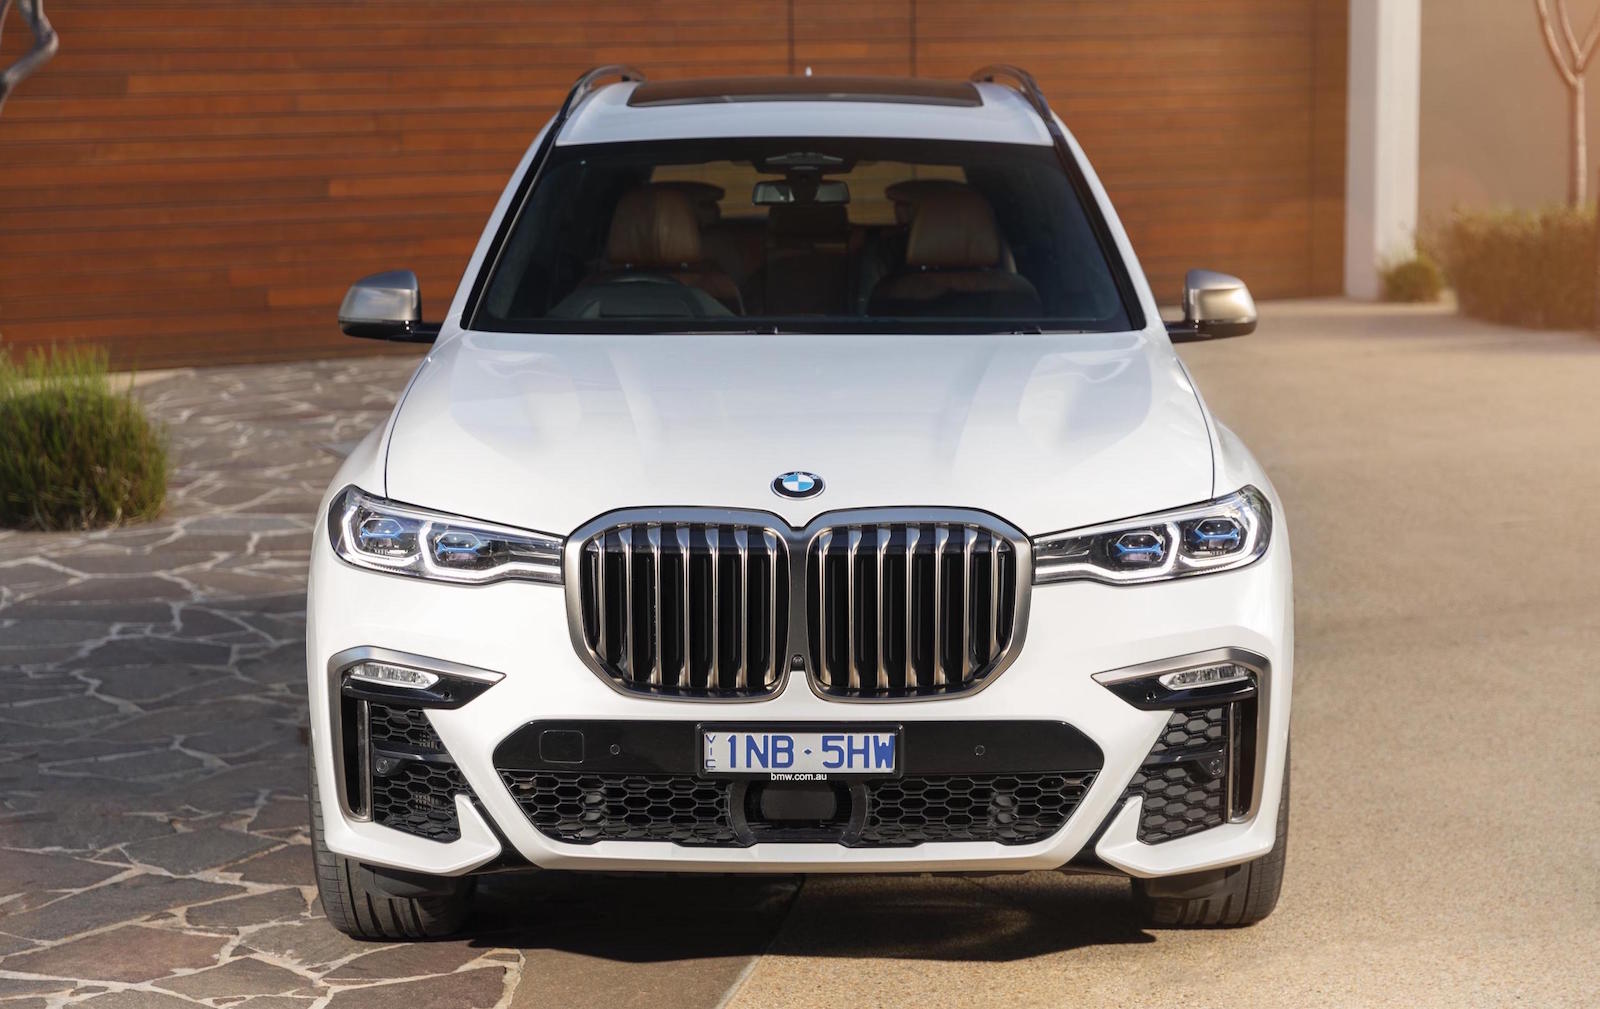 BMW Australia sees sales jump 3.2% in October, led by X5 & X7